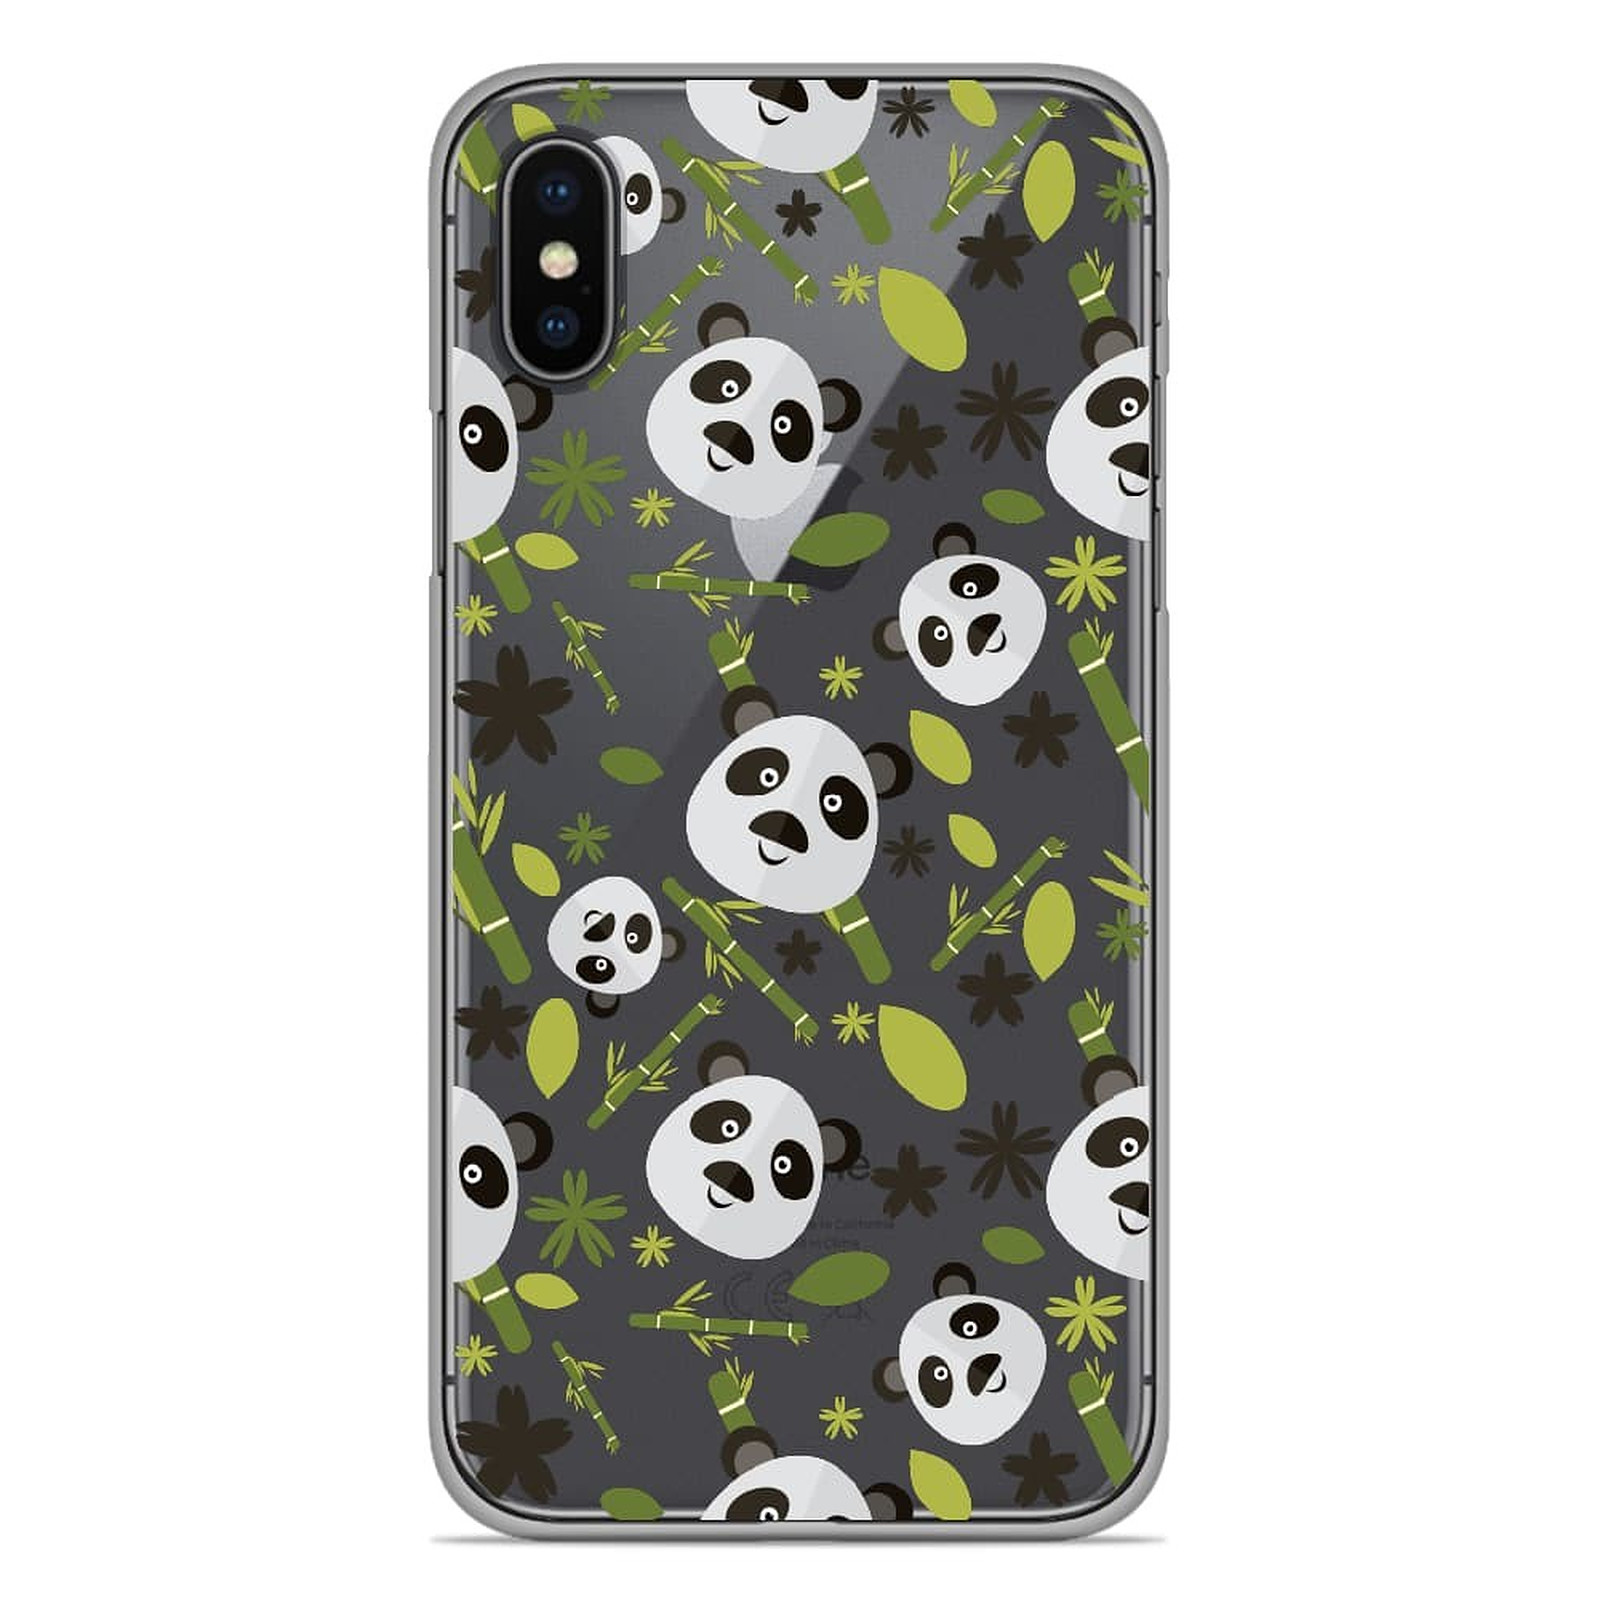 1001 Coques Coque silicone gel Apple iPhone X / XS motif Pandas et Bambou - Coque telephone 1001Coques